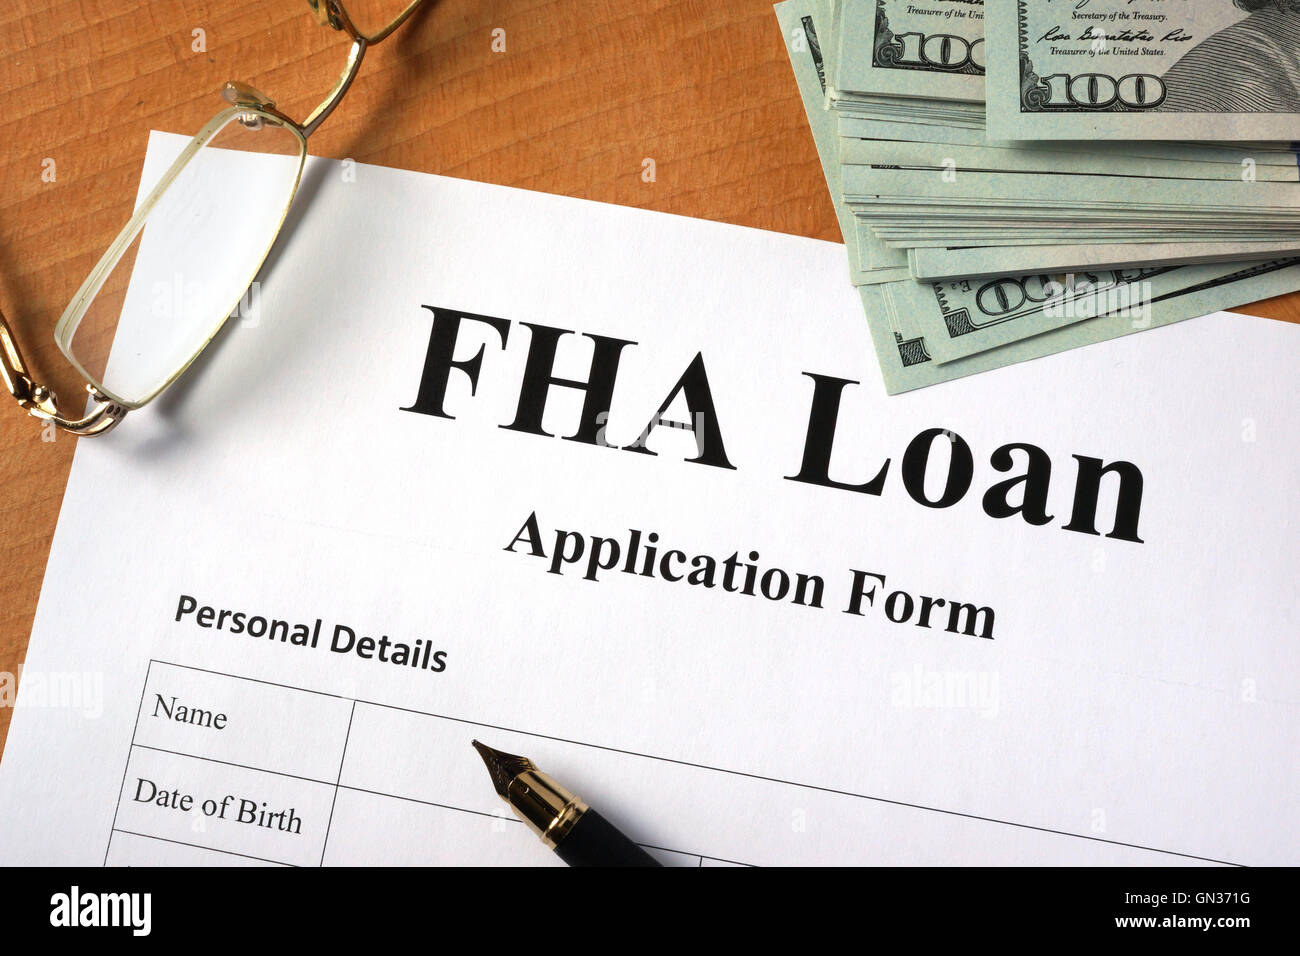 FHA loan form on a wooden table. Stock Photo